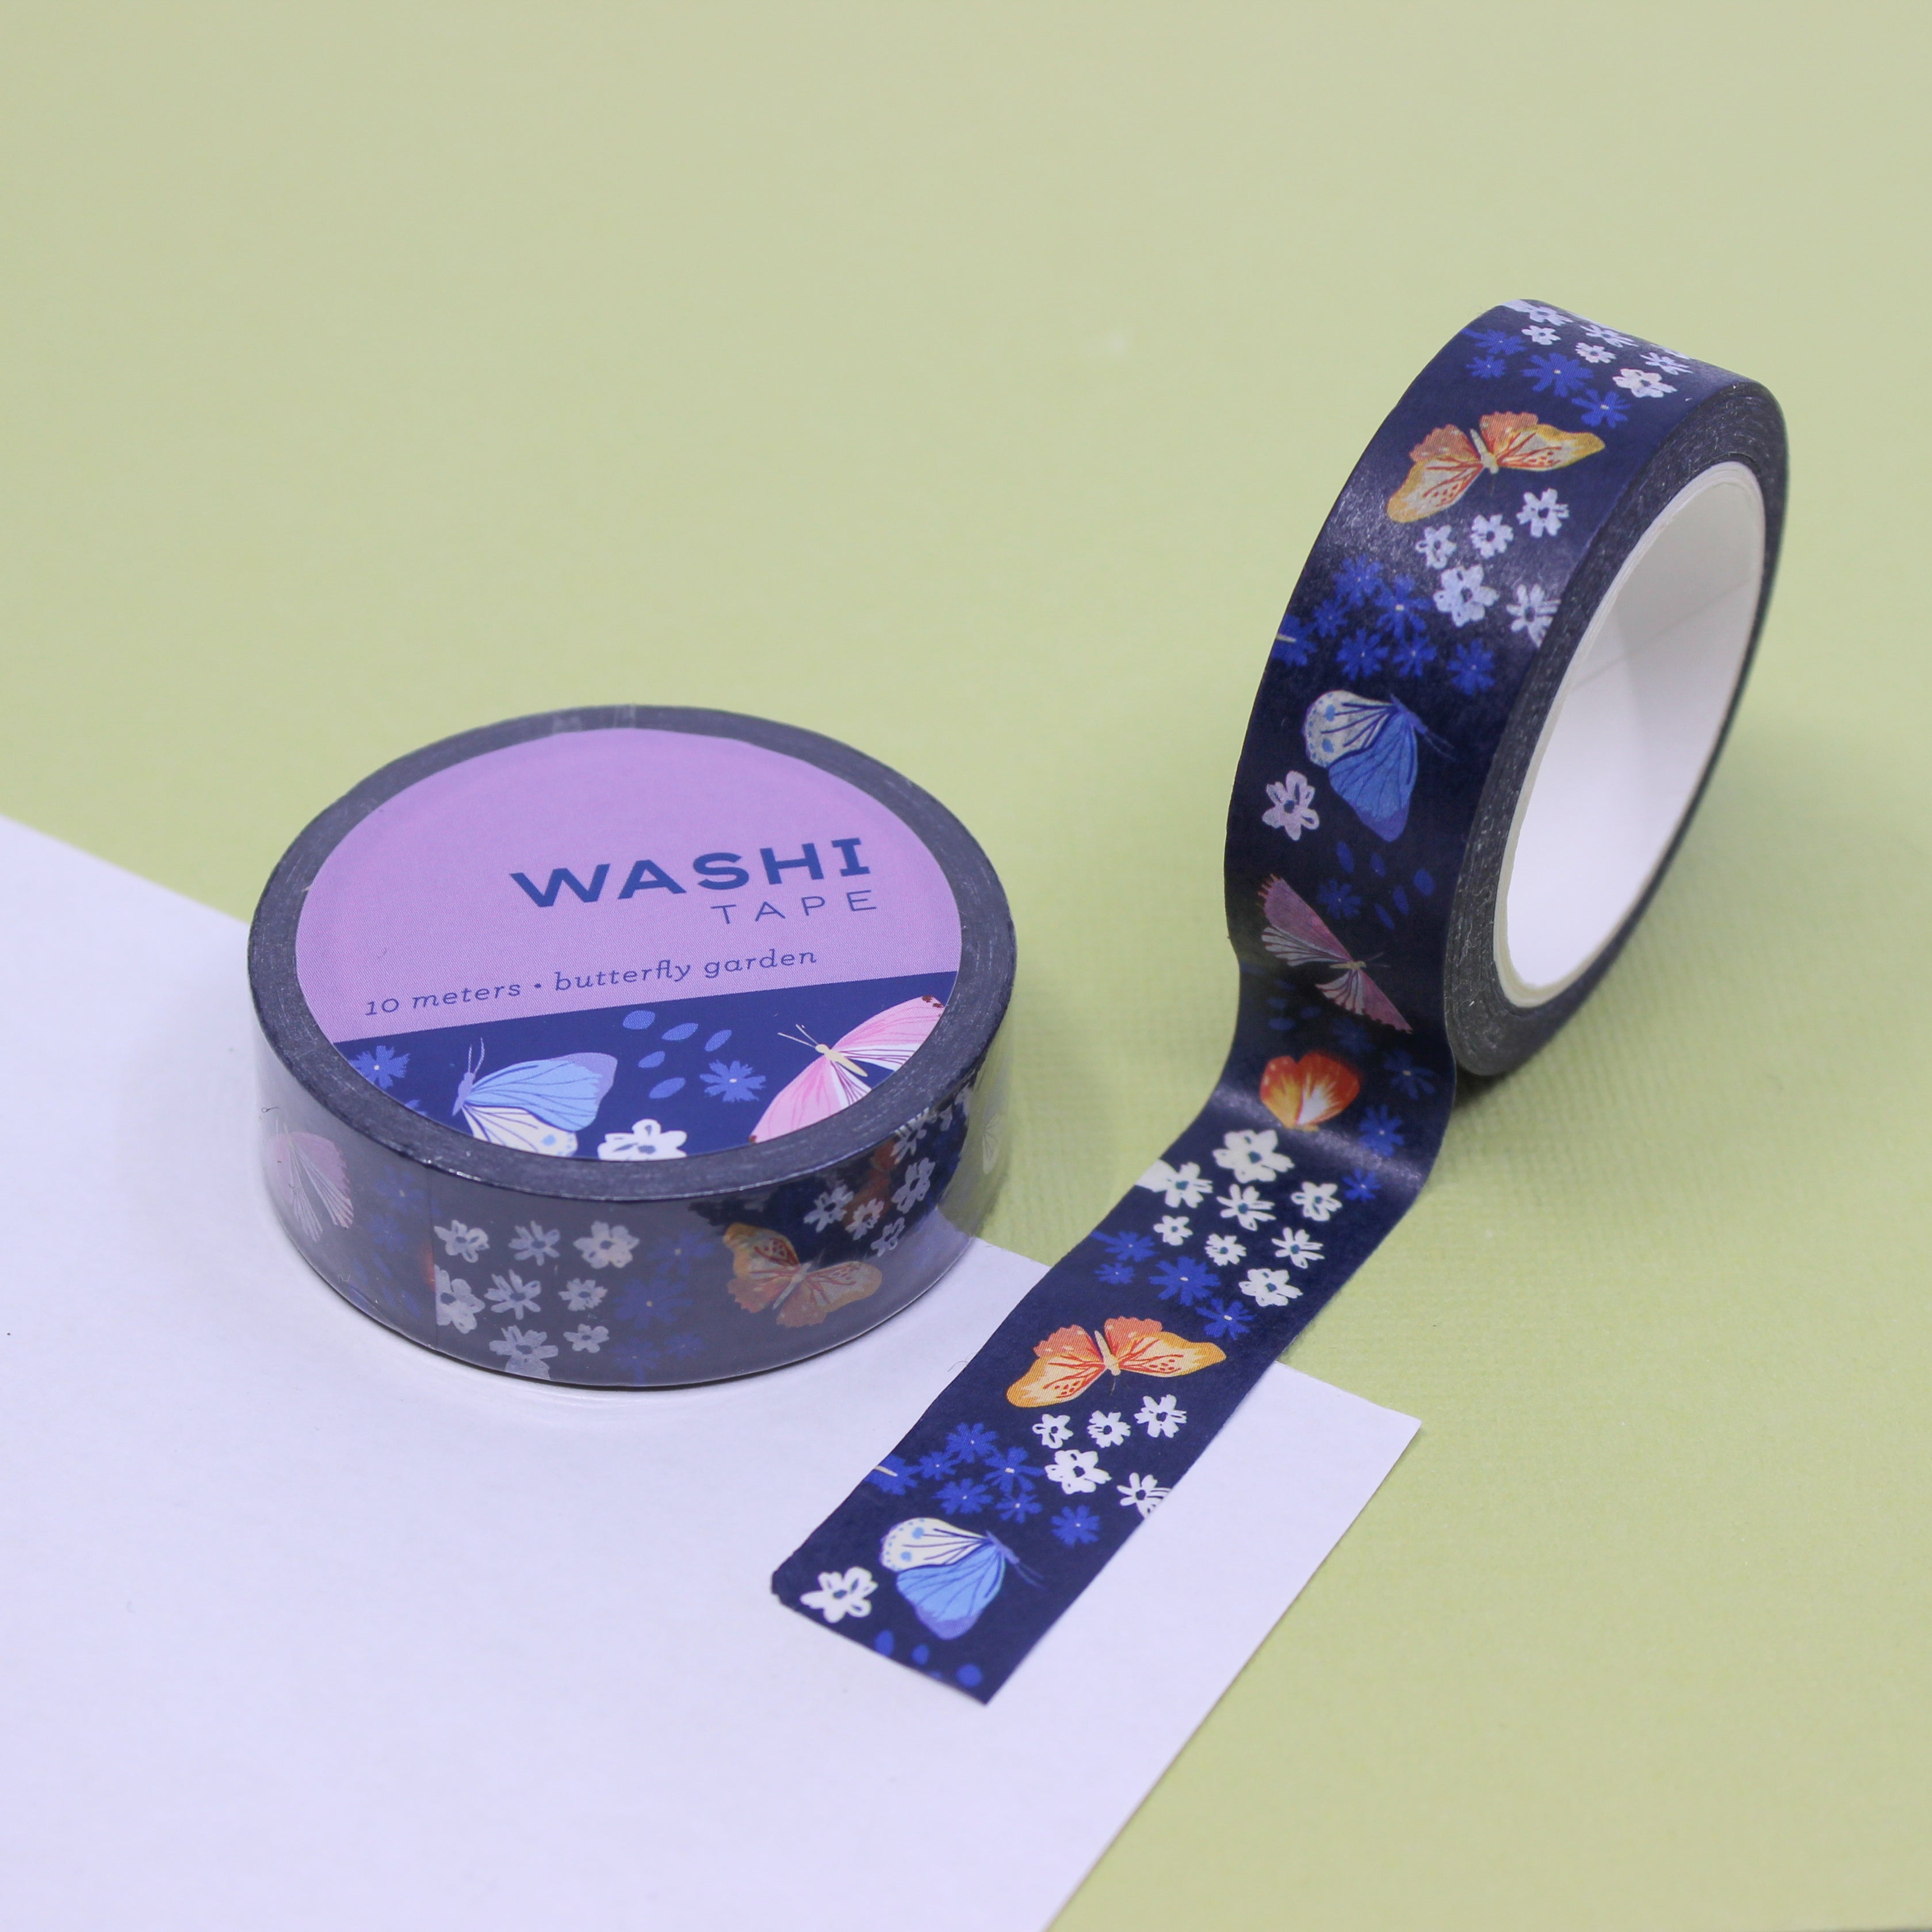 Elevate your crafts with our Navy Kyoto Butterfly Washi Tape, featuring elegant butterfly motifs in a serene navy blue hue. Perfect for adding a touch of Asian-inspired beauty to your projects. This tape is designed by Girl of All Work and sold at BBB Supplies Craft Shop.